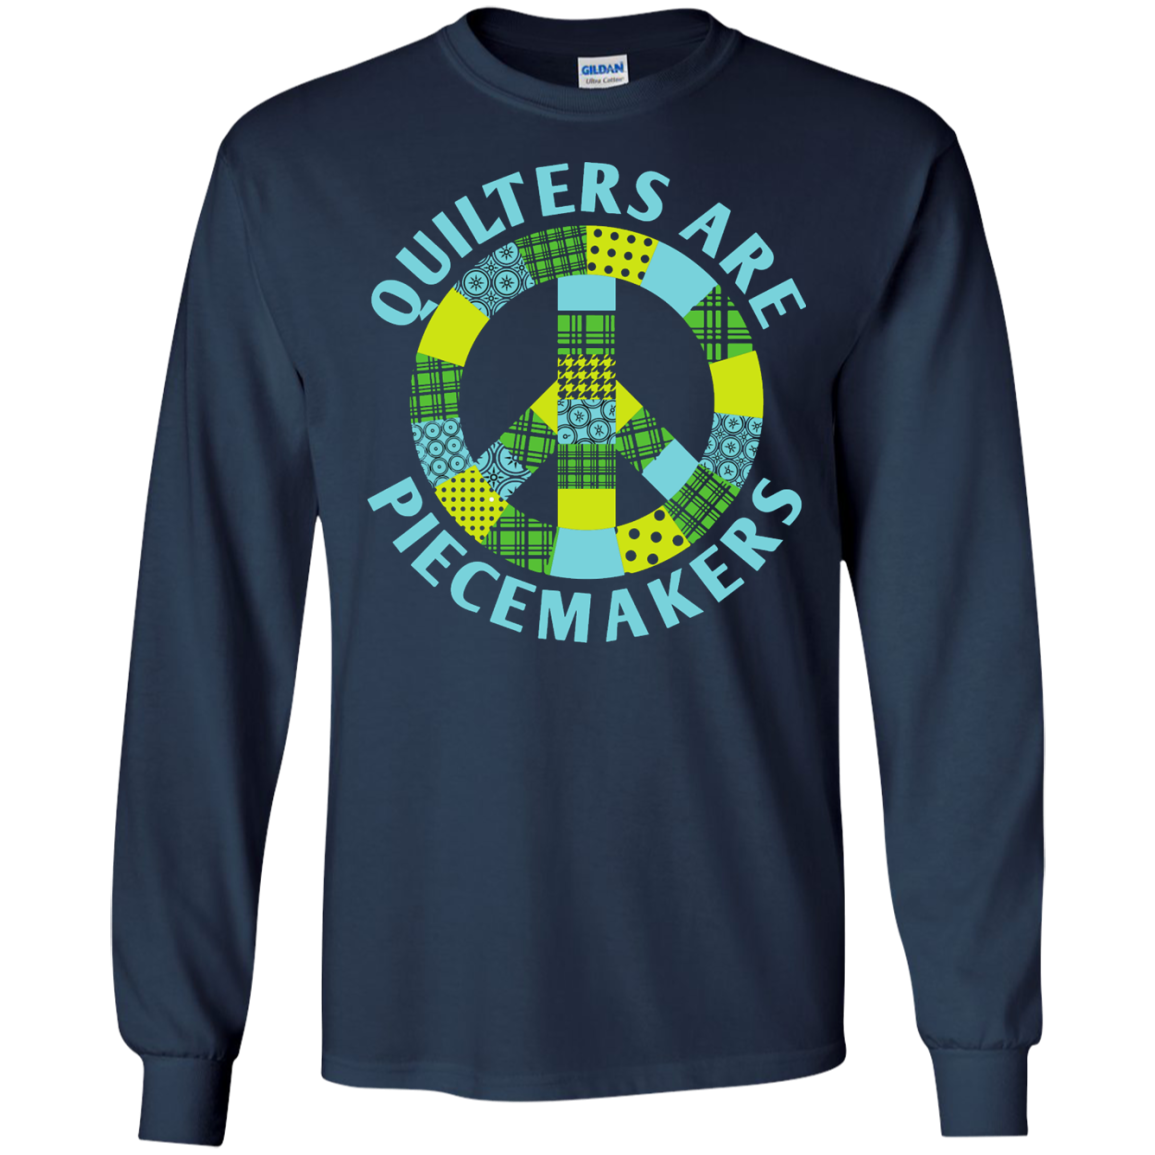 Quilters are Piecemakers Long Sleeve Ultra Cotton T-Shirt - Crafter4Life - 10